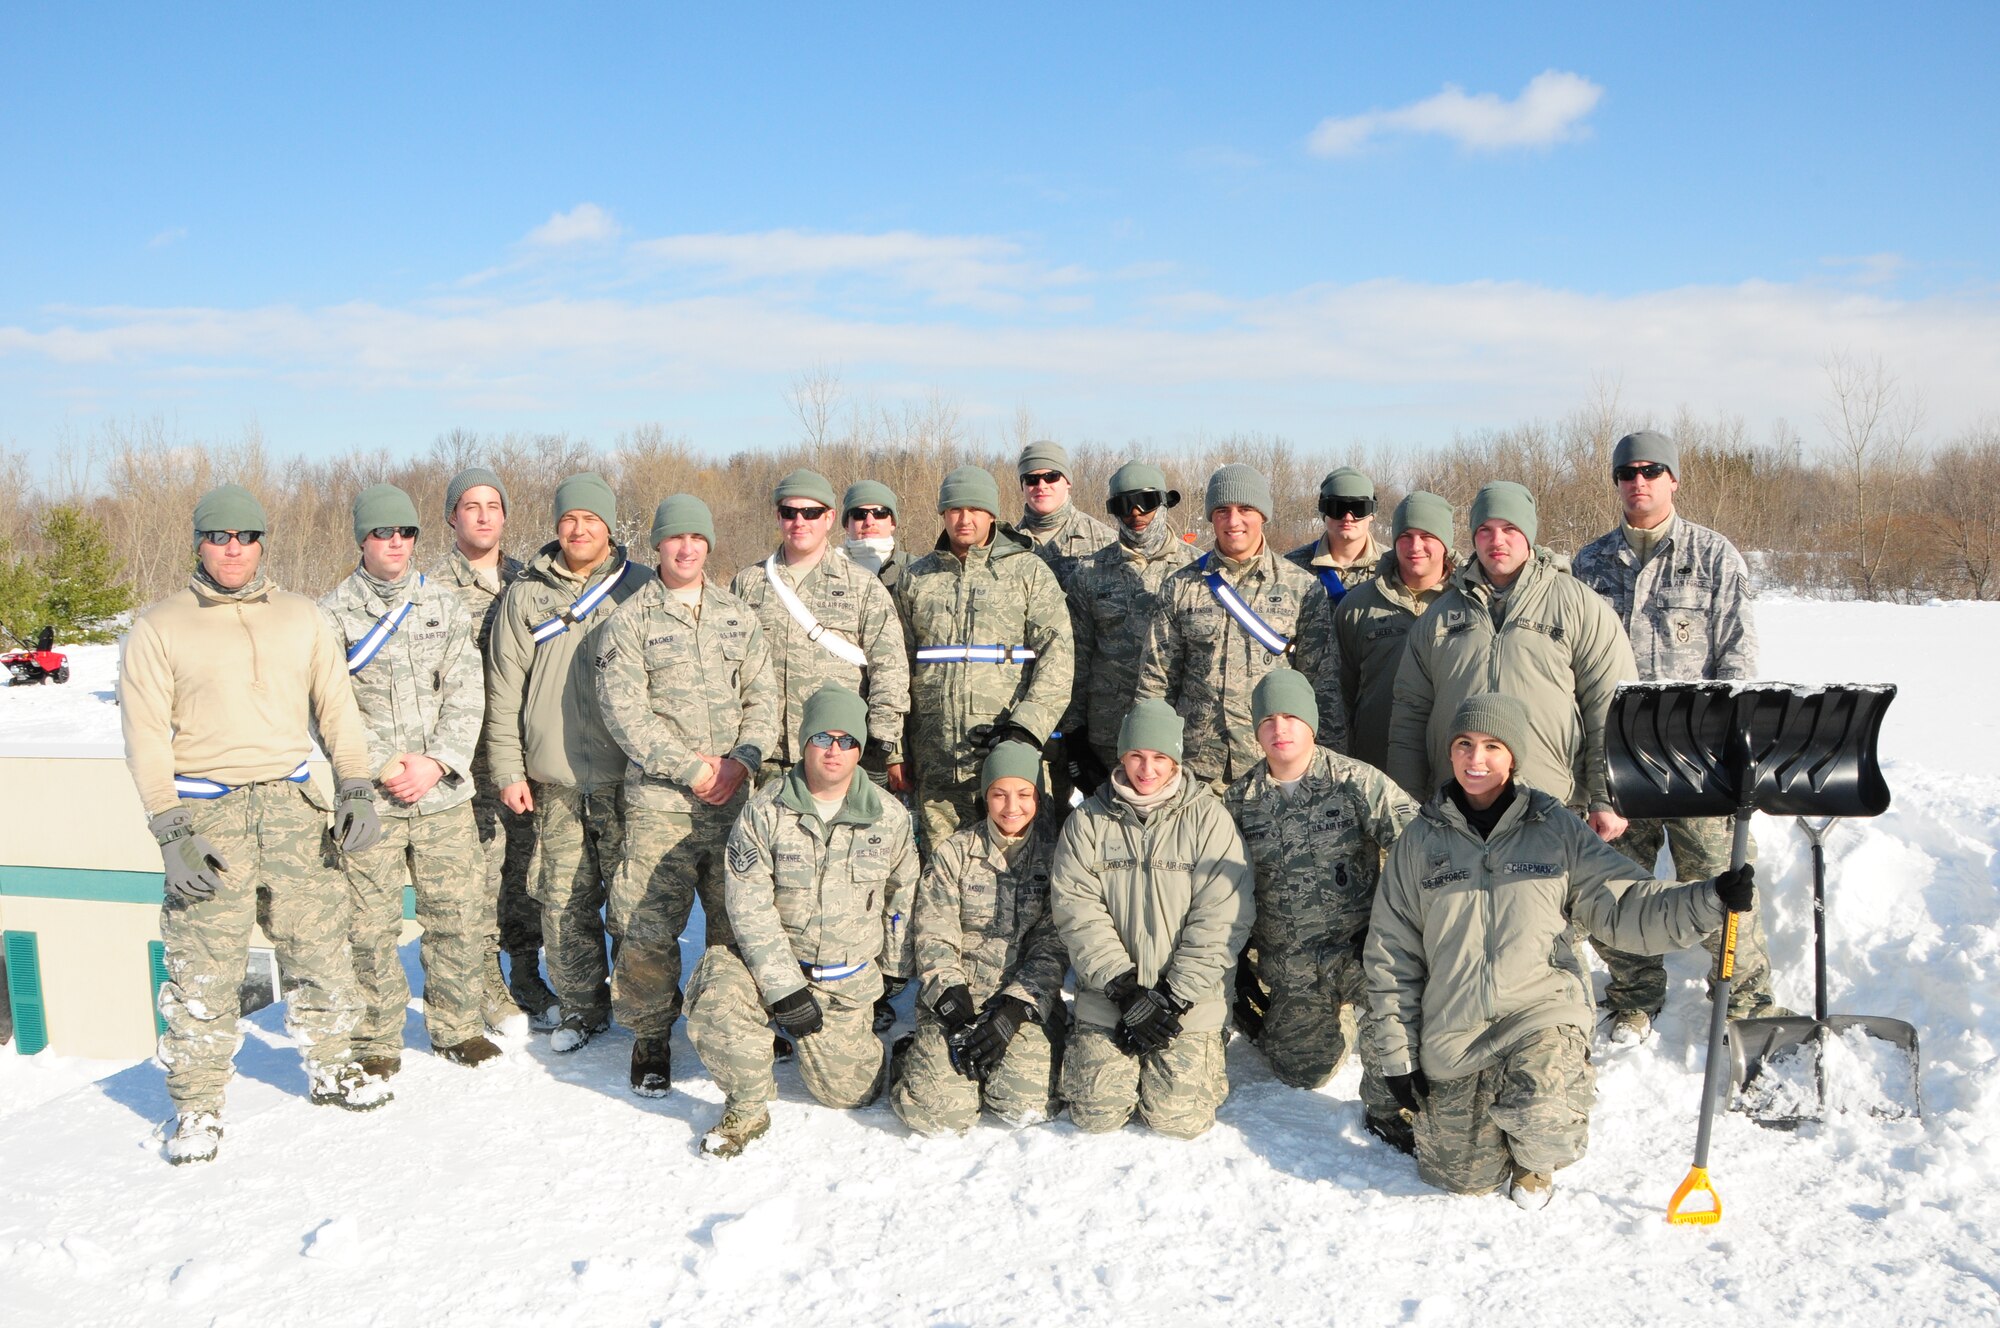 Airmen from the 107th Airlift Wing’s Security Forces take a break from removing four feet of snow from the roof of Eden Heights Assisted Living Facility in West Seneca, New York which came from the snow storm that hit the Western New York area on Nov 18, 2014. (U.S. Air National Guard photo by Senior Master Sgt. Ray Lloyd)